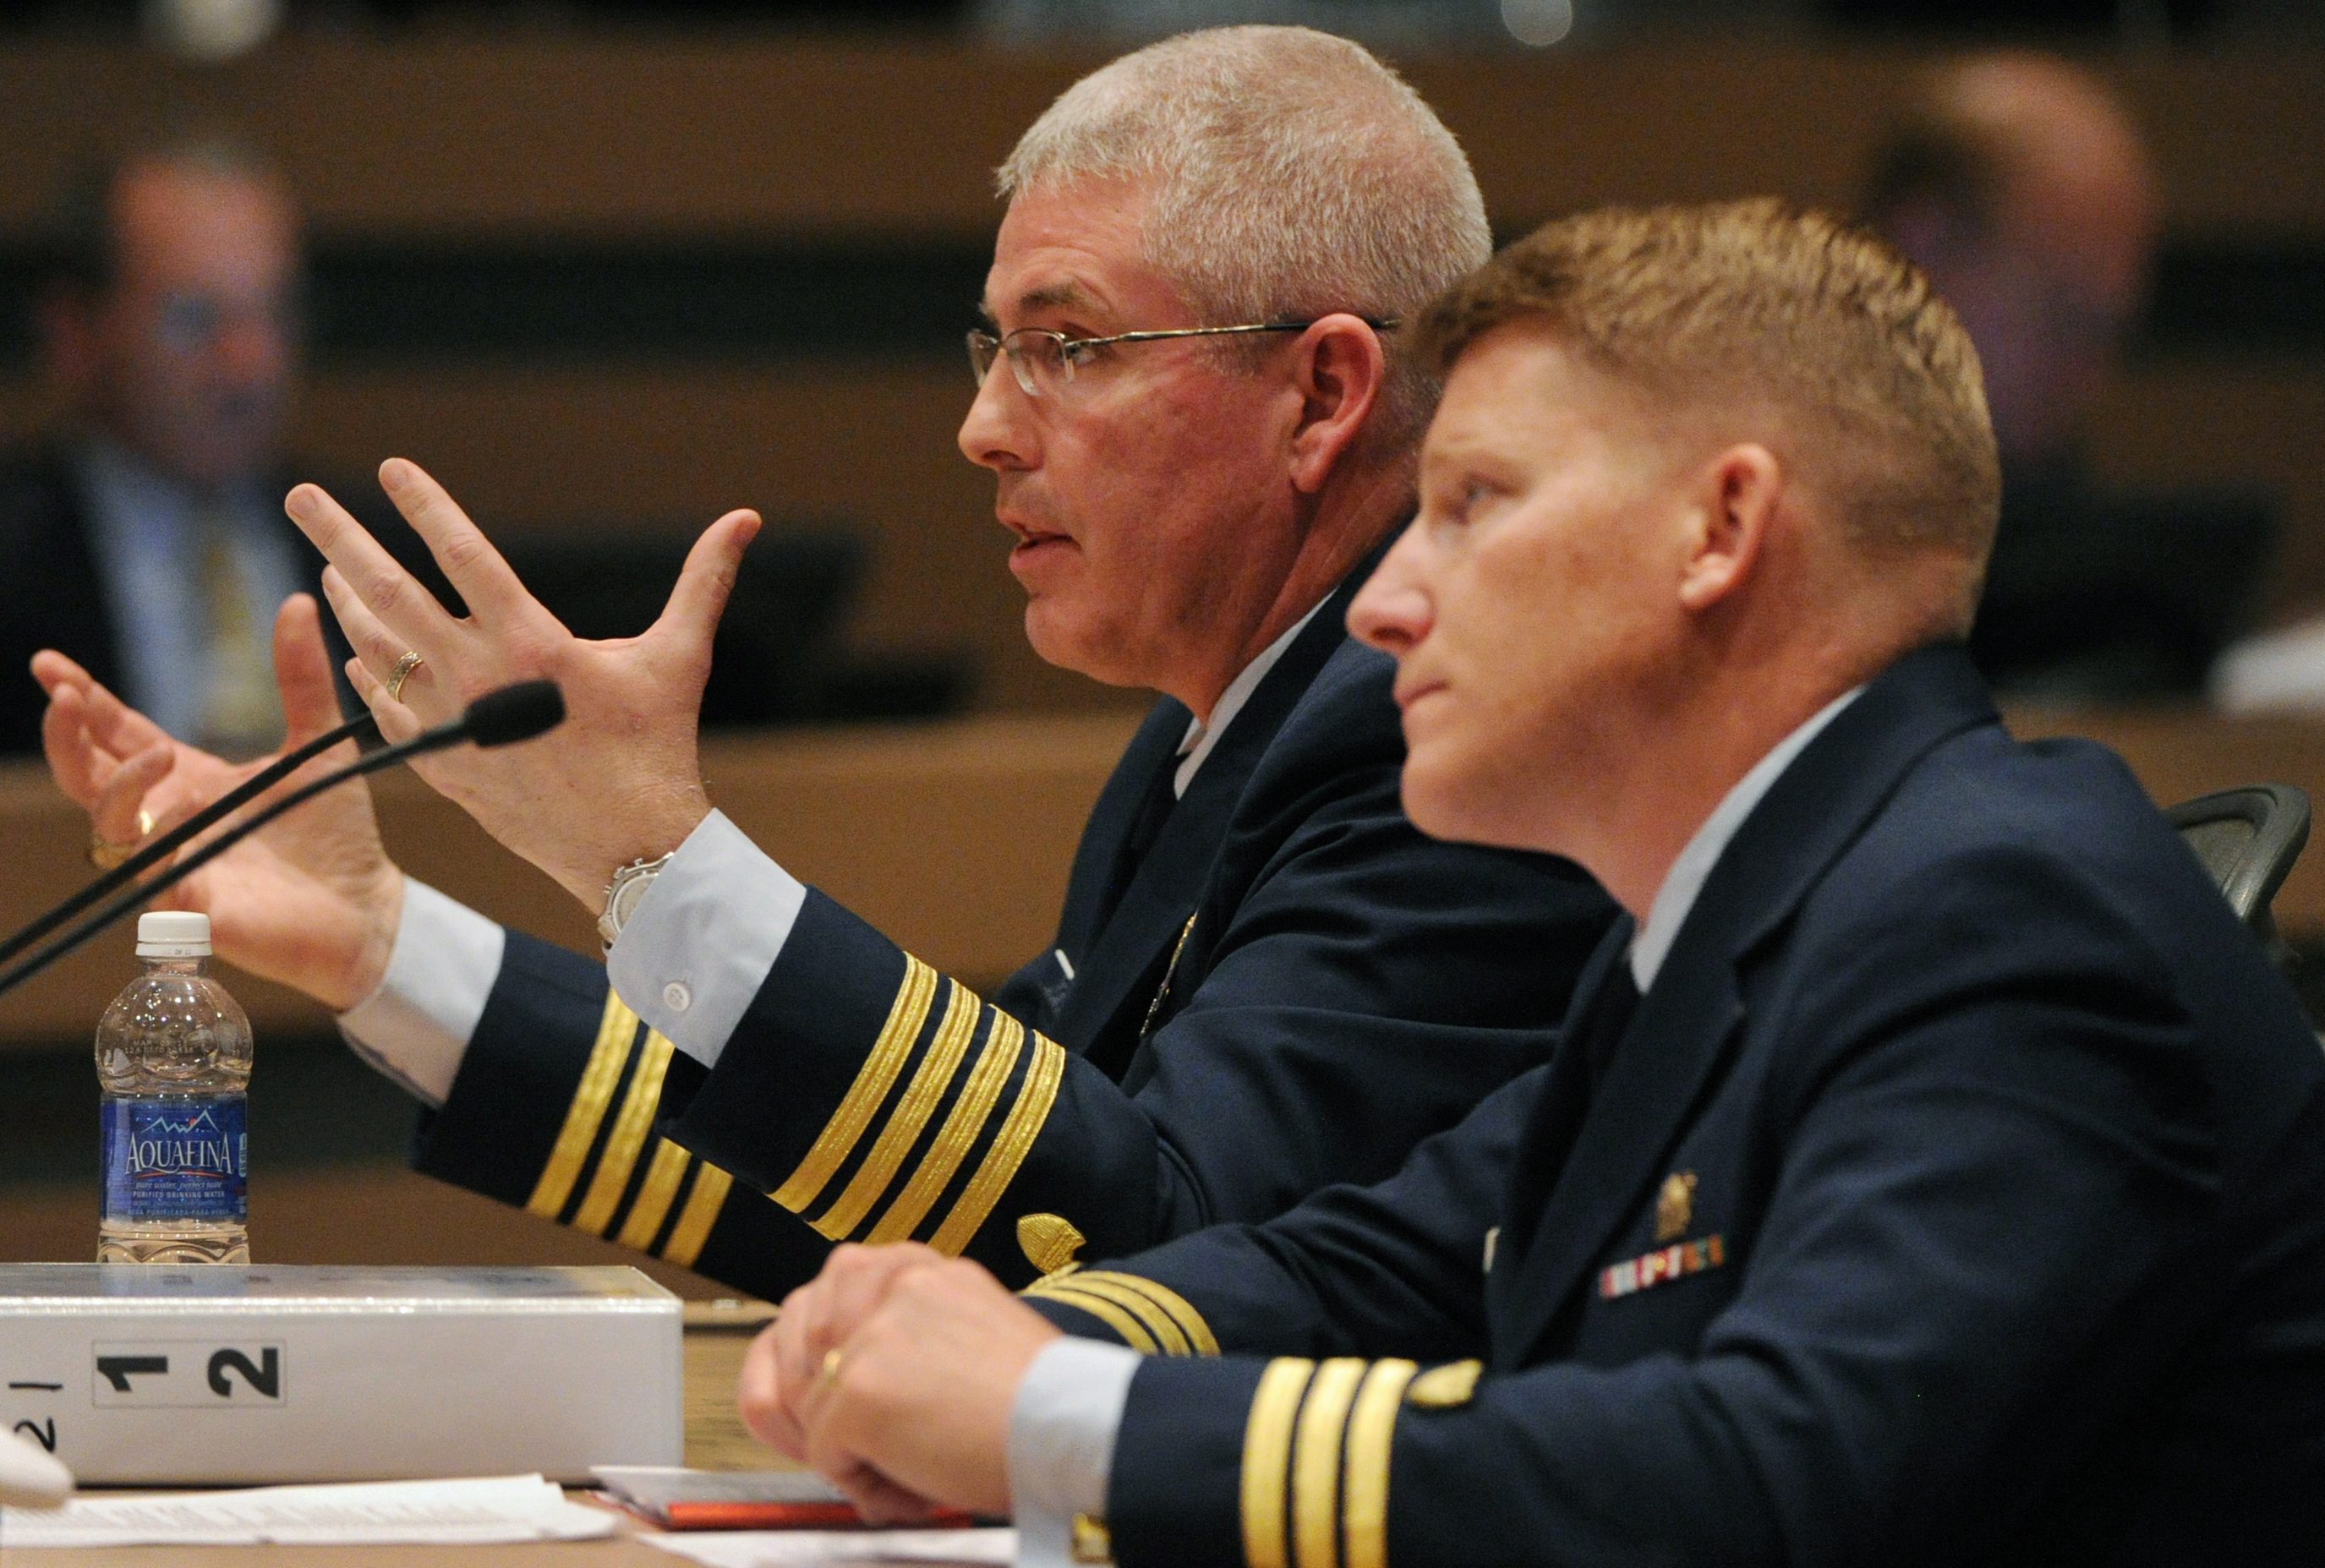 Capt. Paul Mehler III, left, commander of Coast Guard Sector Anchorage, testifies on Wednesday, May 29, 2013, during the formal marine casualty investigation hearing into Shell's conical drilling rig Kulluk grounding on Sitkalidak Island, Alaska, during severe weather on Dec. 31, 2012.  Coast Guard lawyer Cmdr. William Dwyer listens at right.  (Bill Roth, Pool, Anchorage Daily News/AP)